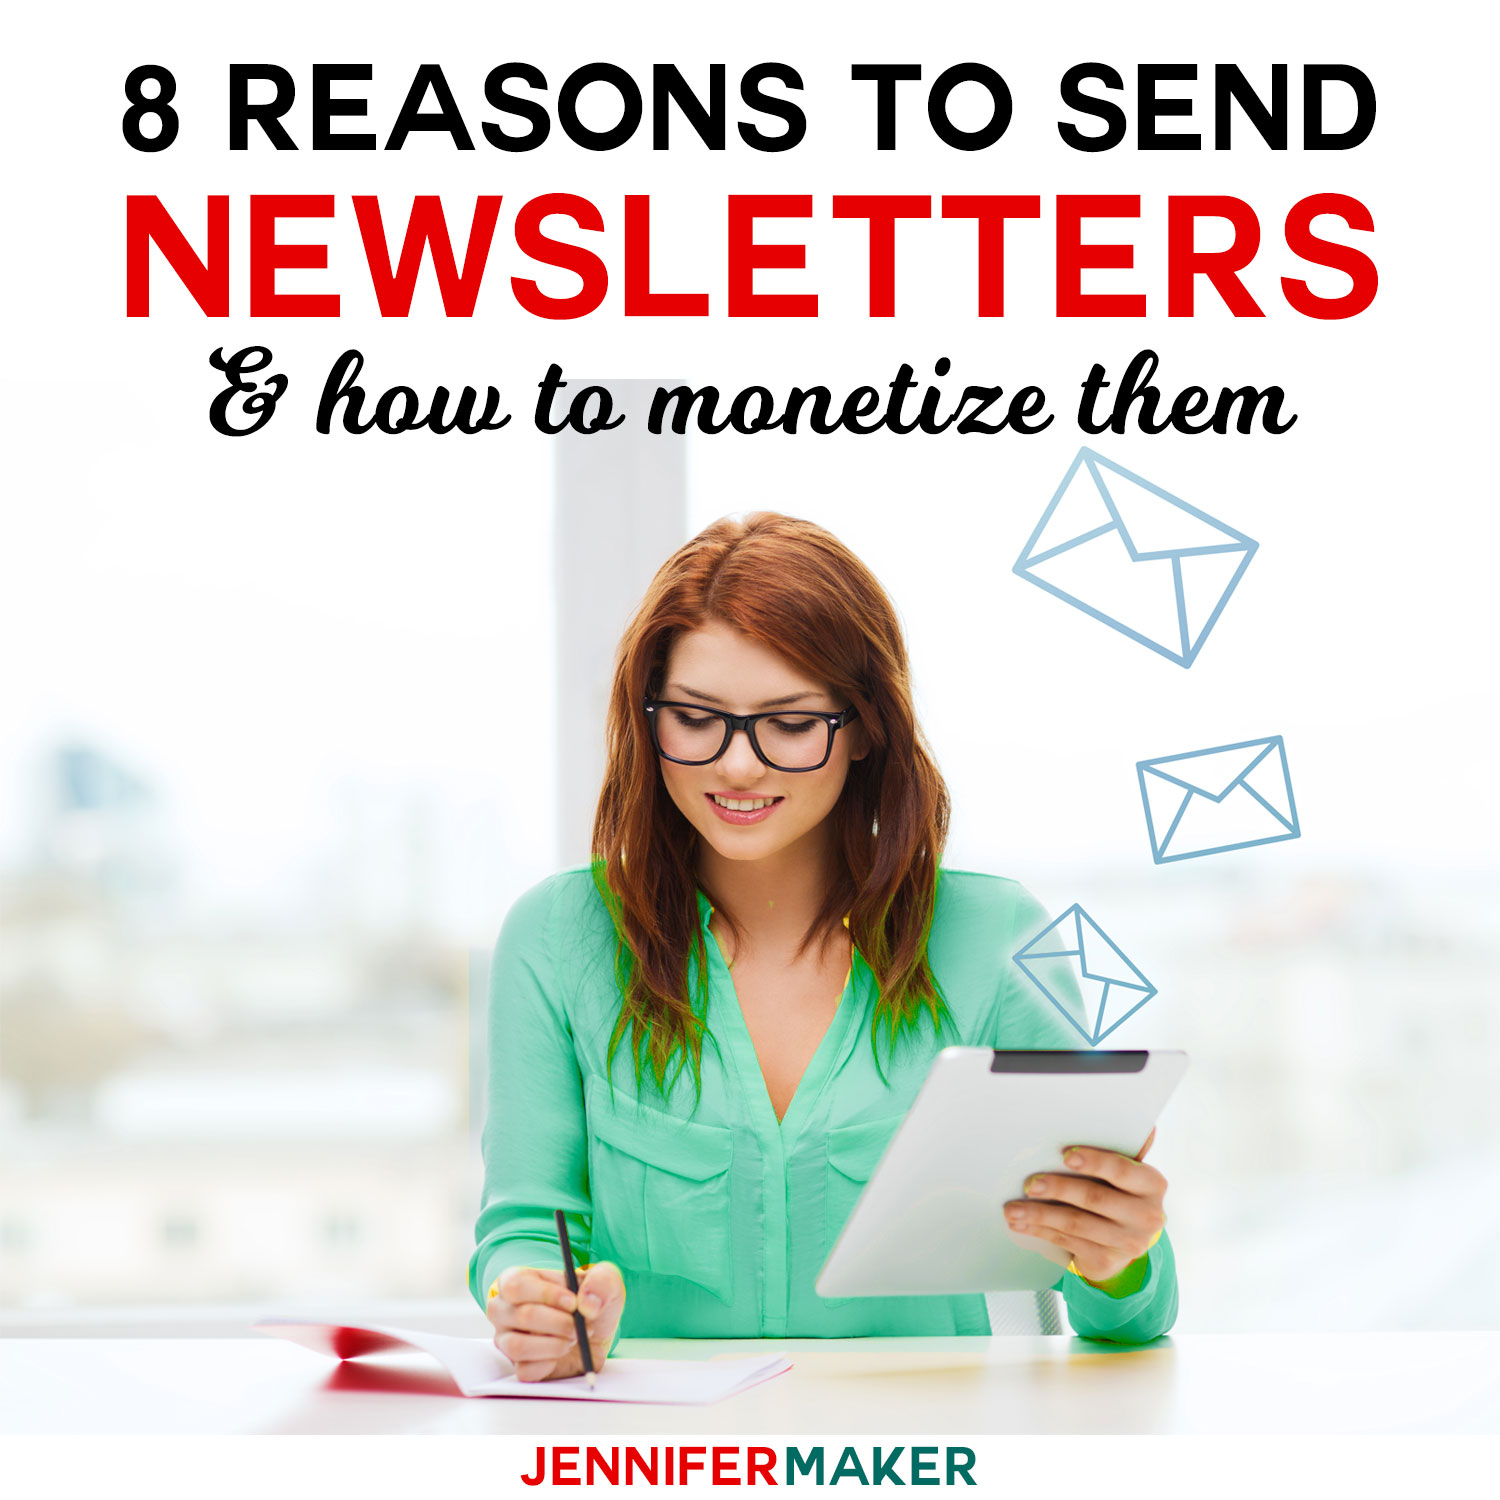 8 Reasons to Send Newsletters (& How to Monetize Them)